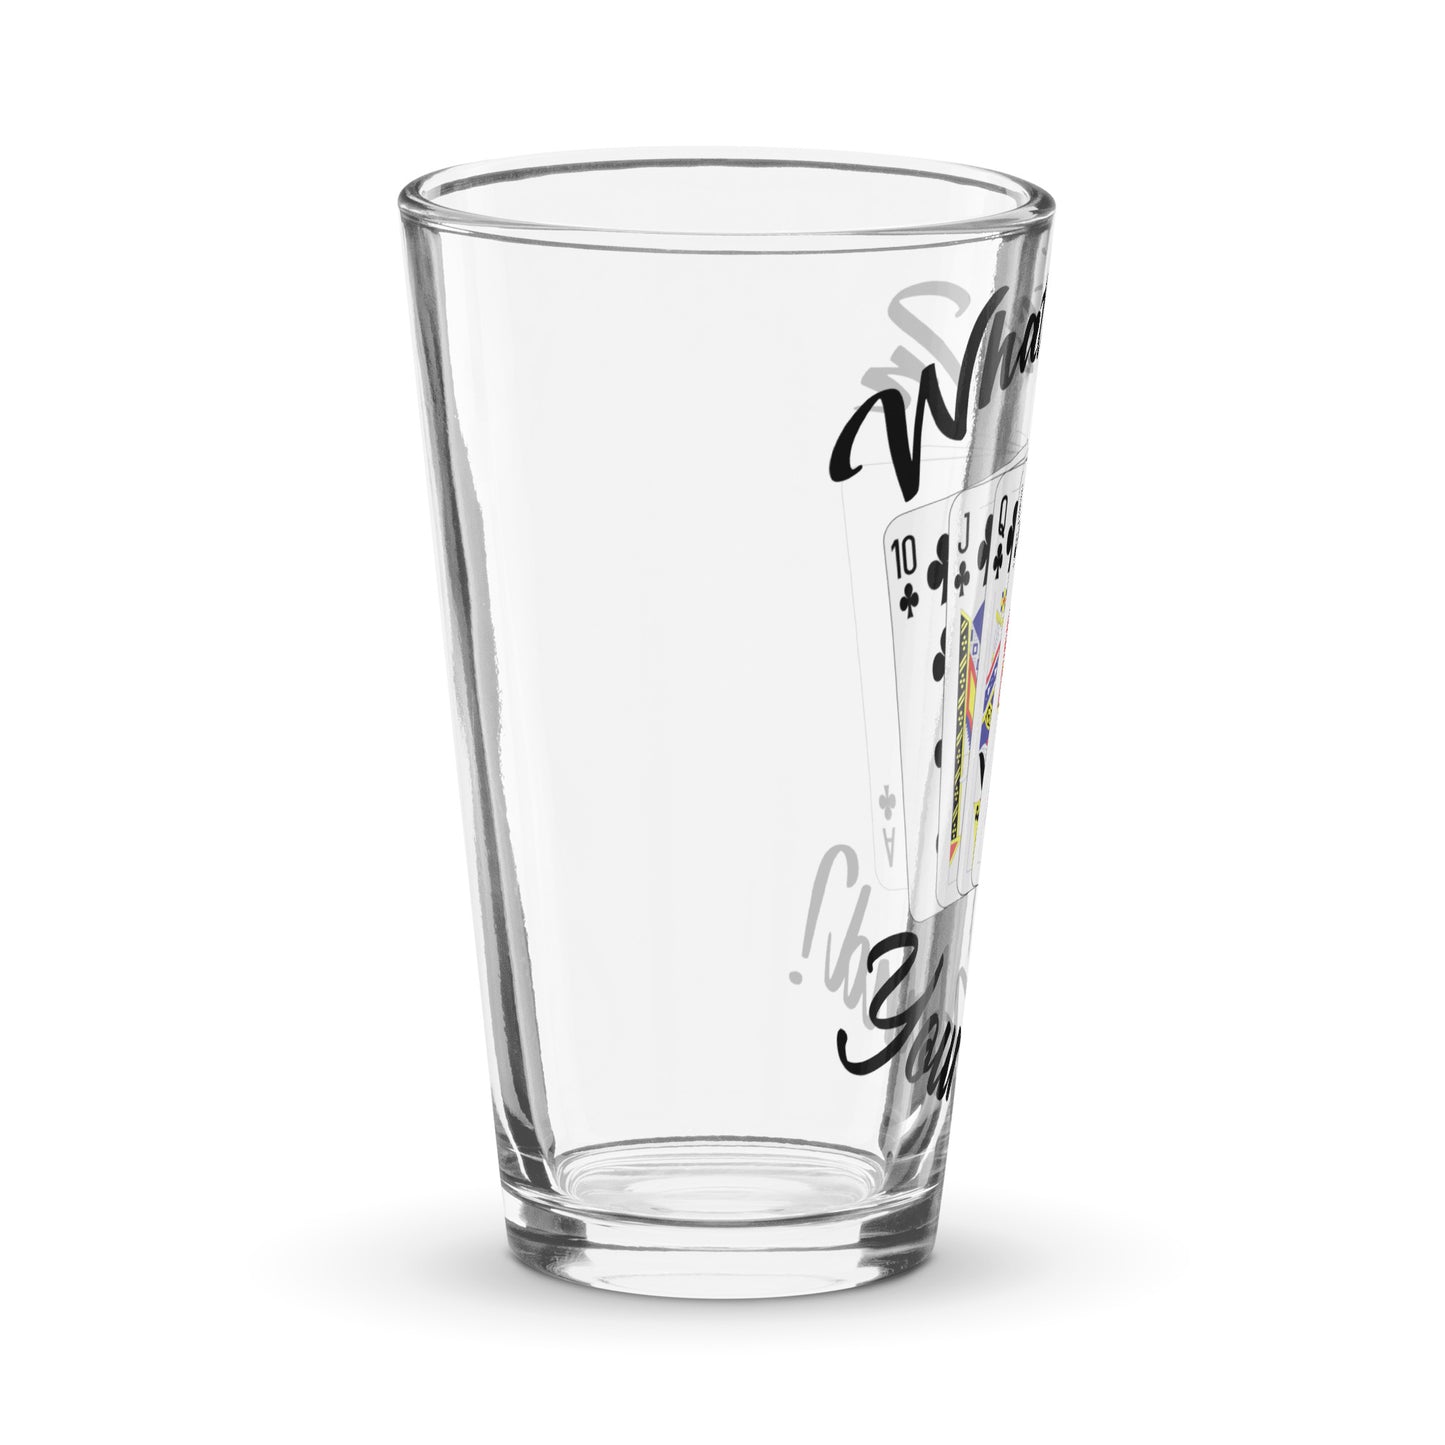 Clubs 29 Cribbage Hand 16 oz Shaker Pint Glass